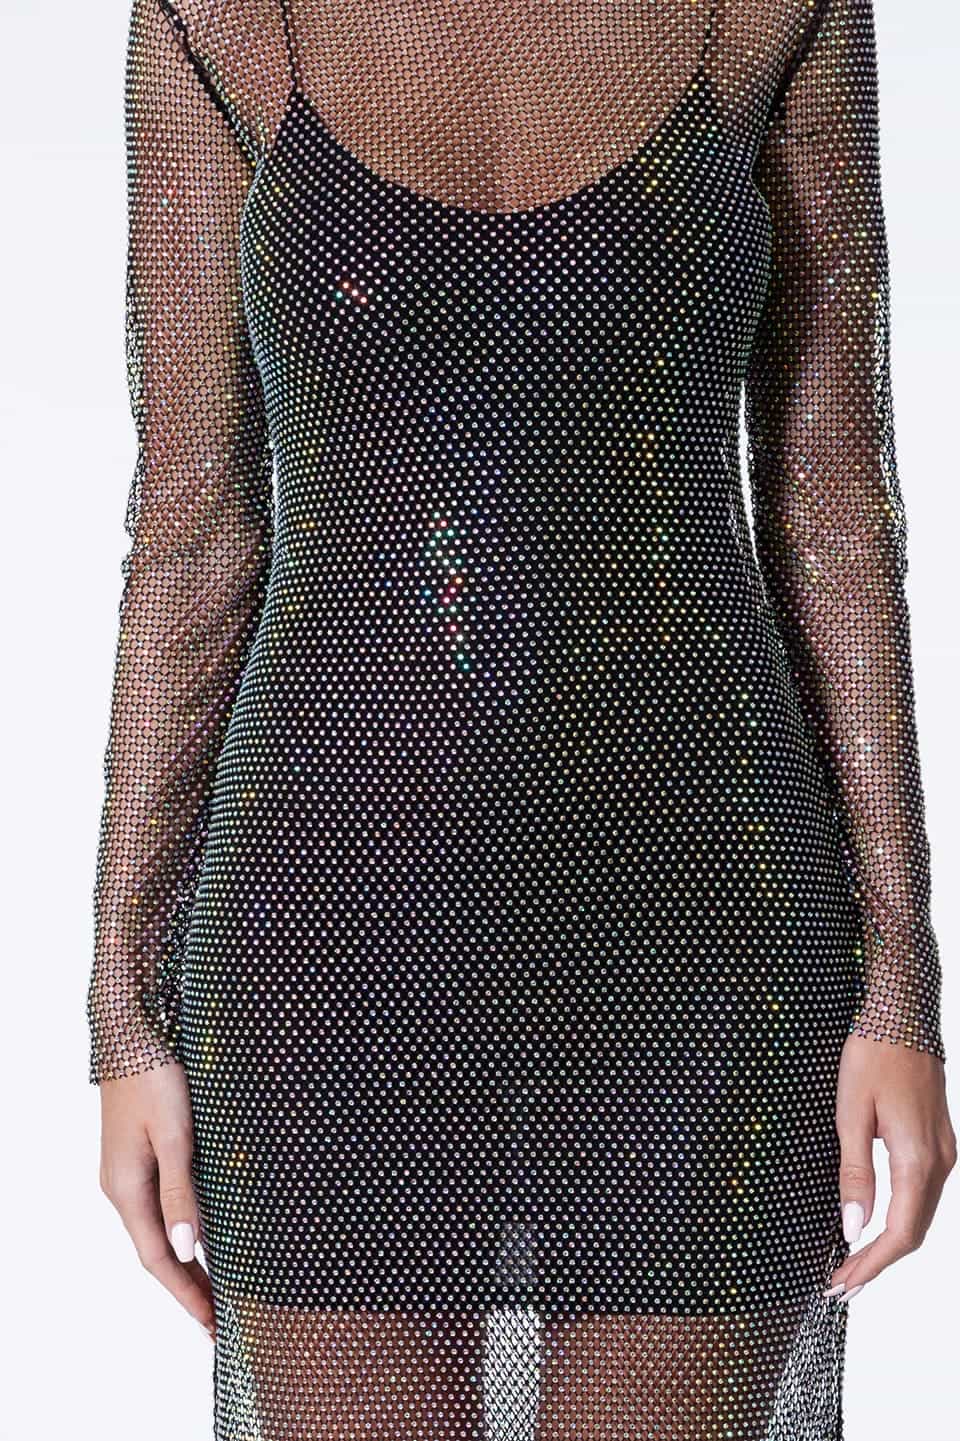 Thumbnail for Product gallery 4, Anze designer's dress crafted from delicate mesh with glittering crystals. Zoom on material details